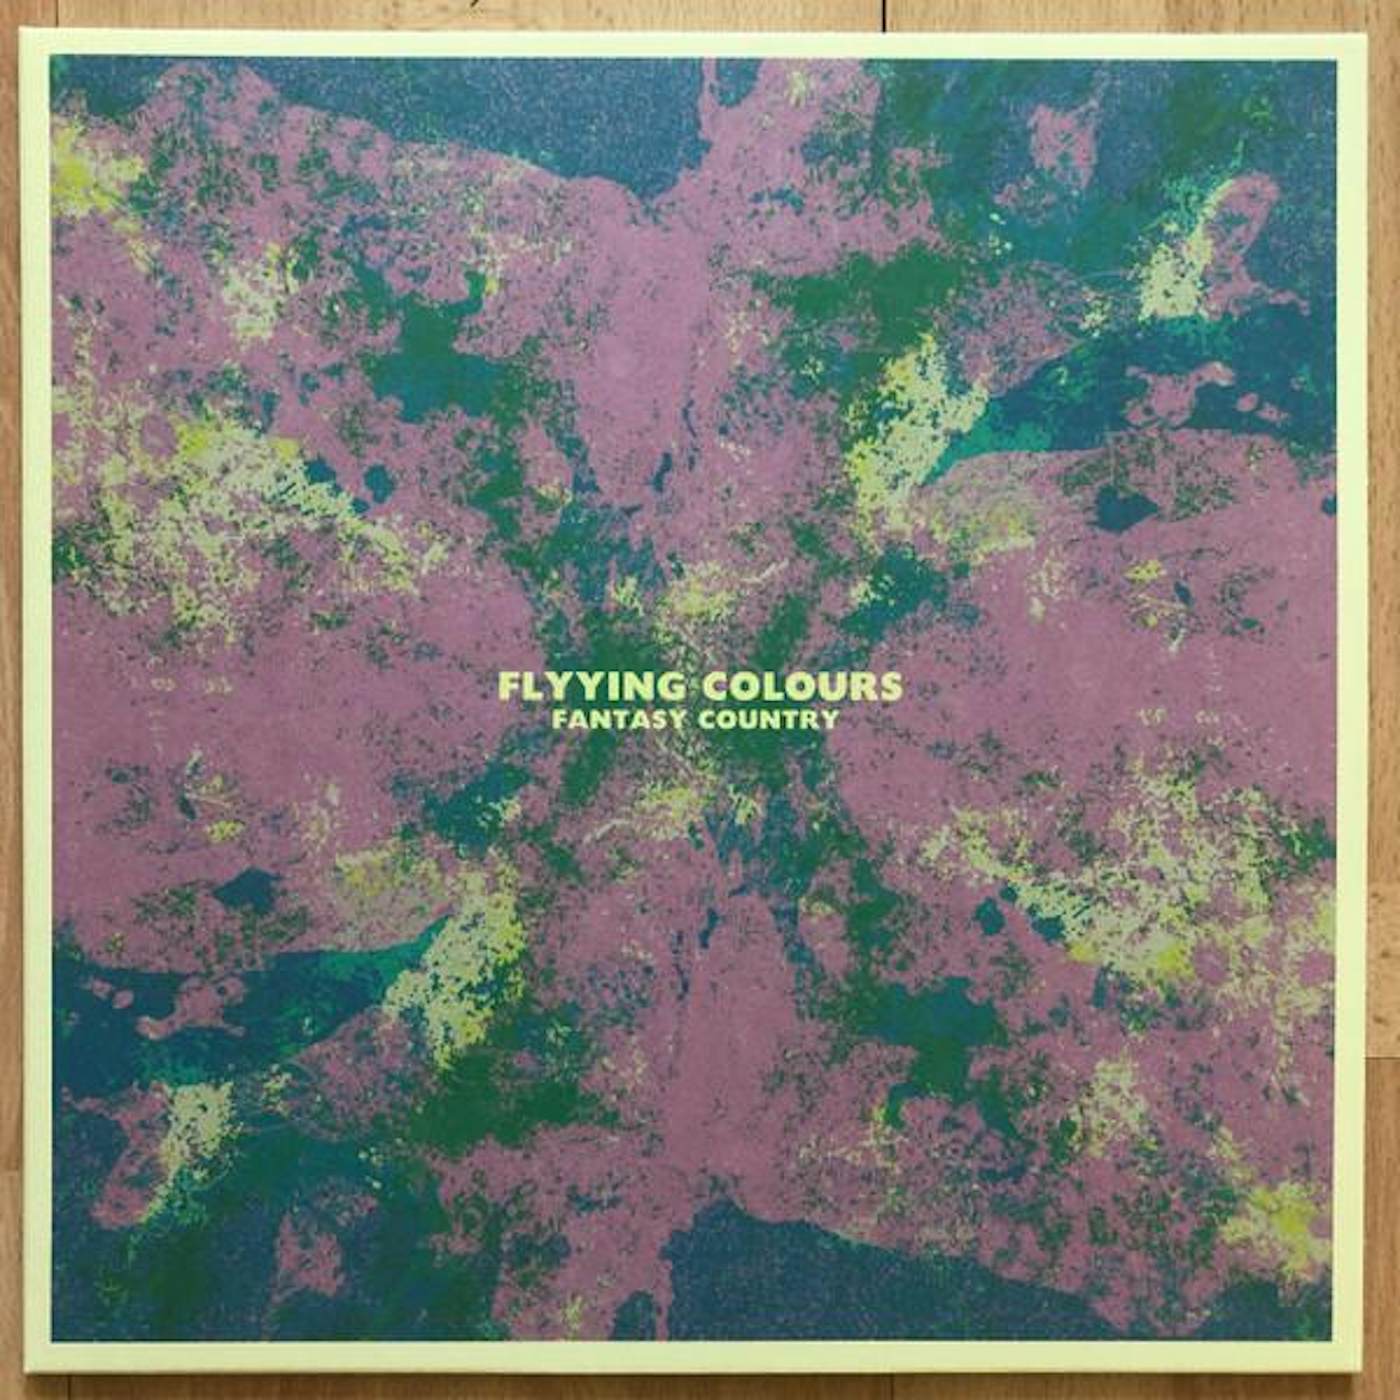 Flyying Colours Fantasy Country Vinyl Record